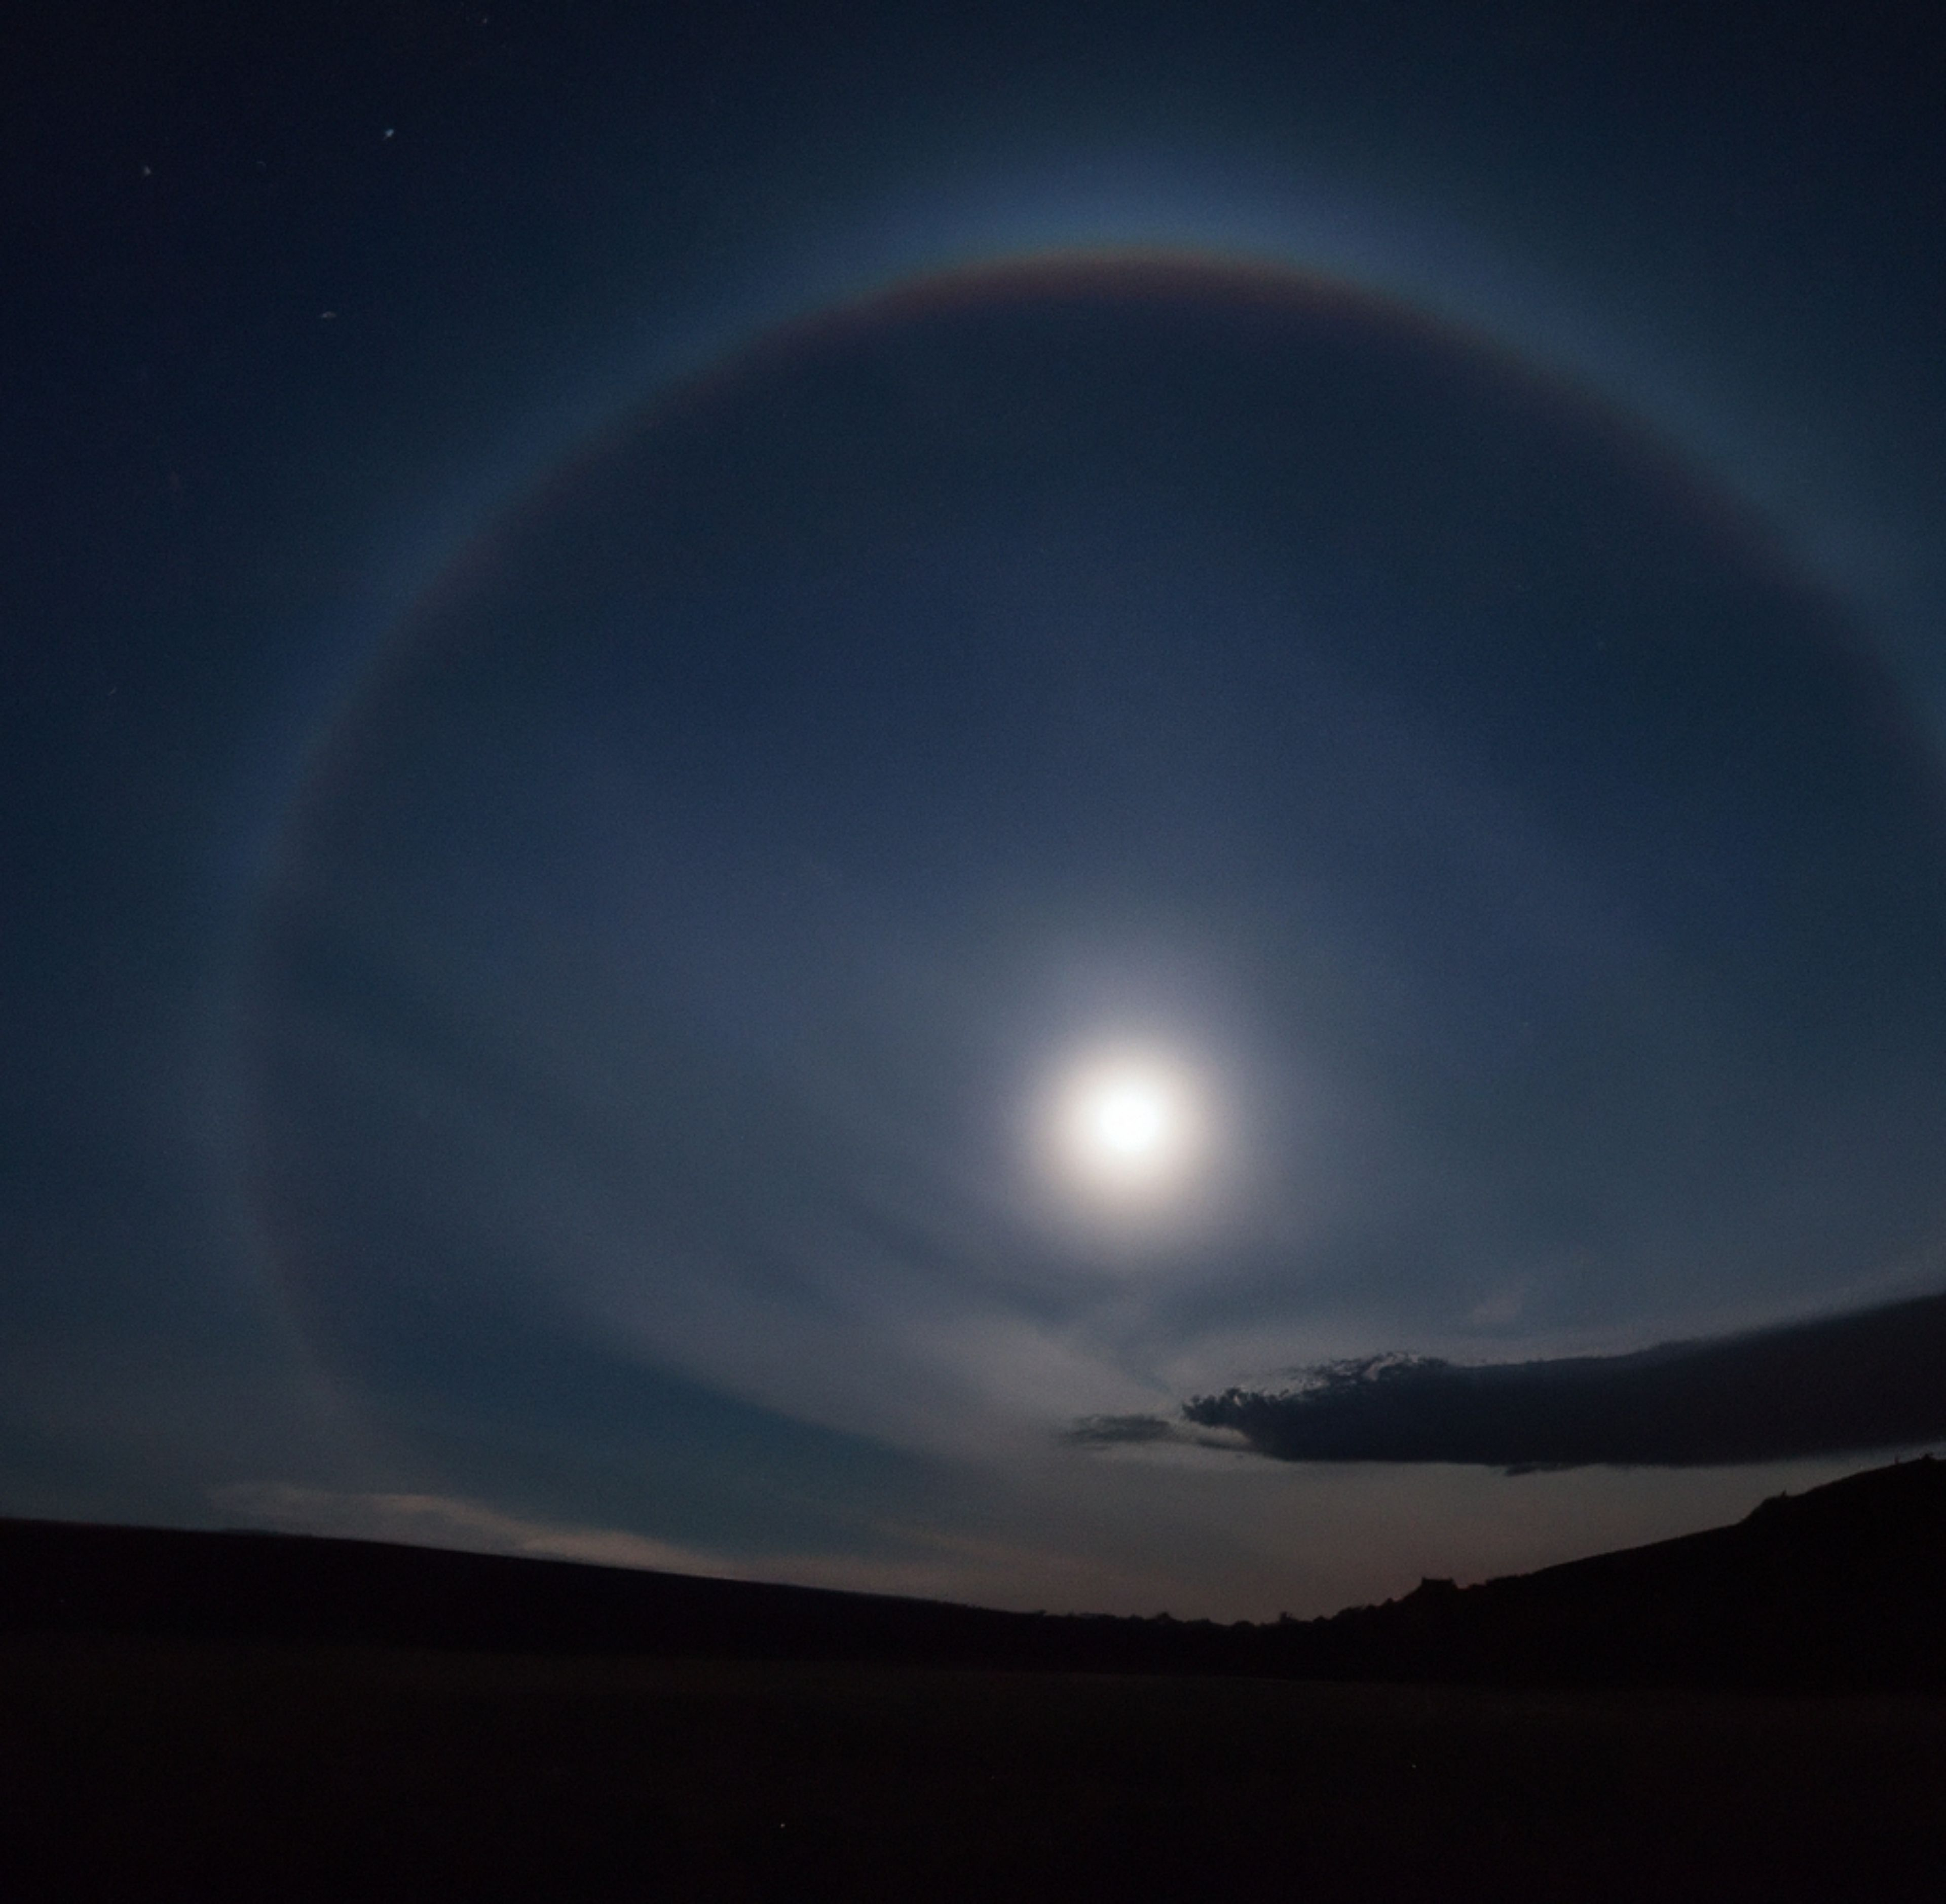 A moonbow in the night sky; it looks like a large white circle around the moon